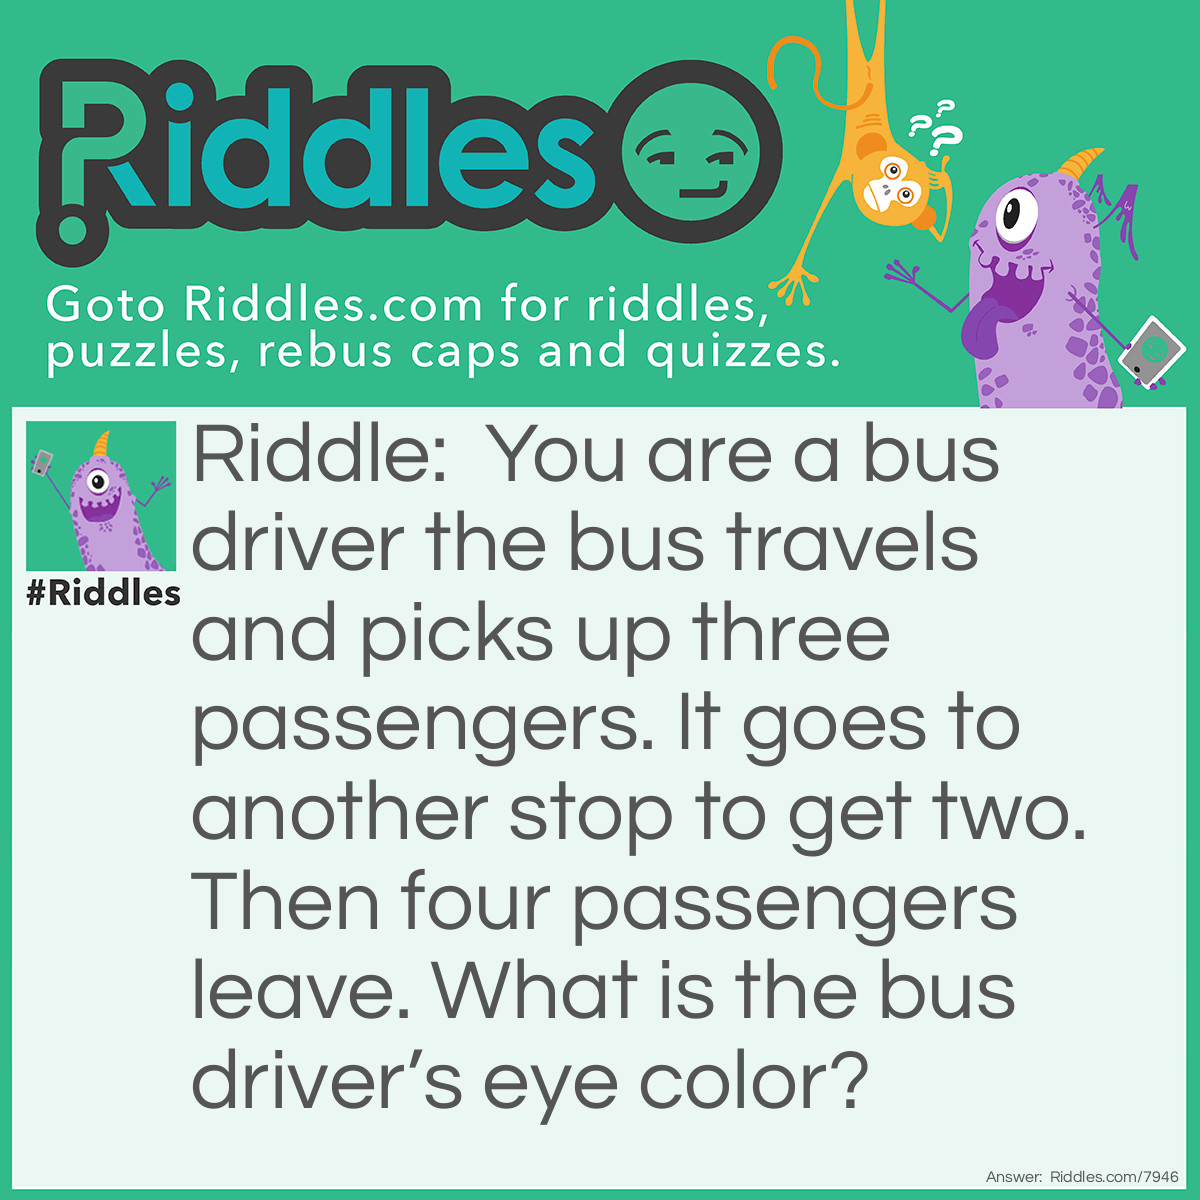 Riddle: You are a bus driver the bus travels and picks up three passengers. It goes to another stop to get two. Then four passengers leave. What is the bus driver's eye color? Answer: You r eye color. The bus driver is you.